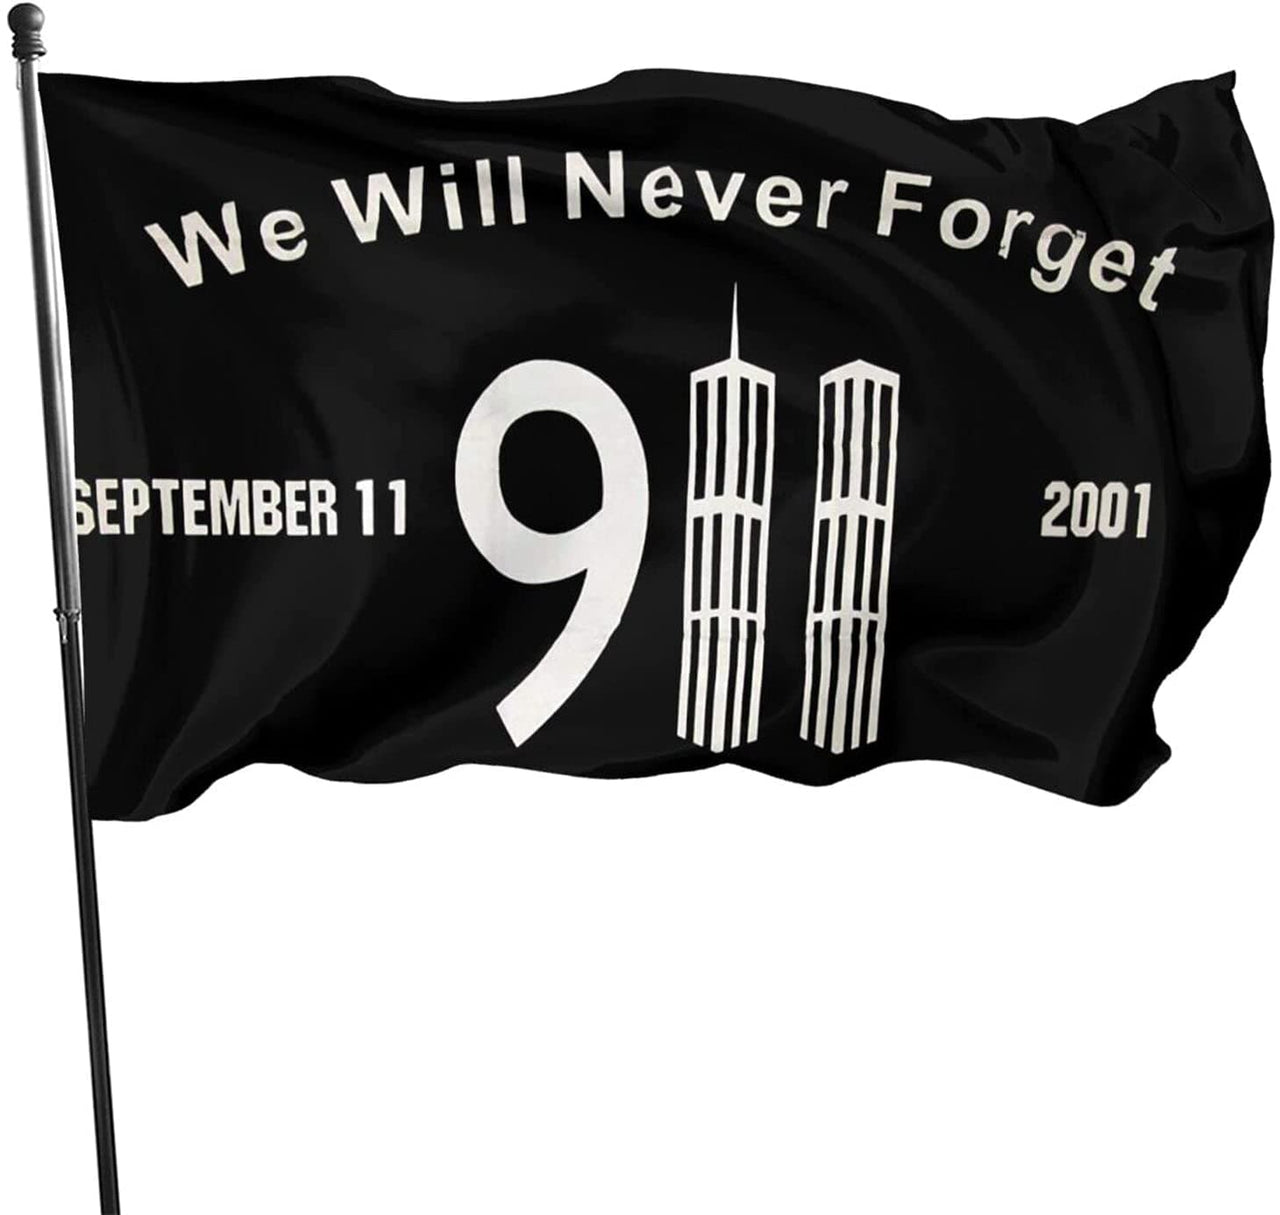 We Will Never Forget 9/11 Commemorative Premium Oxford Flag Black 3FT x 5FT